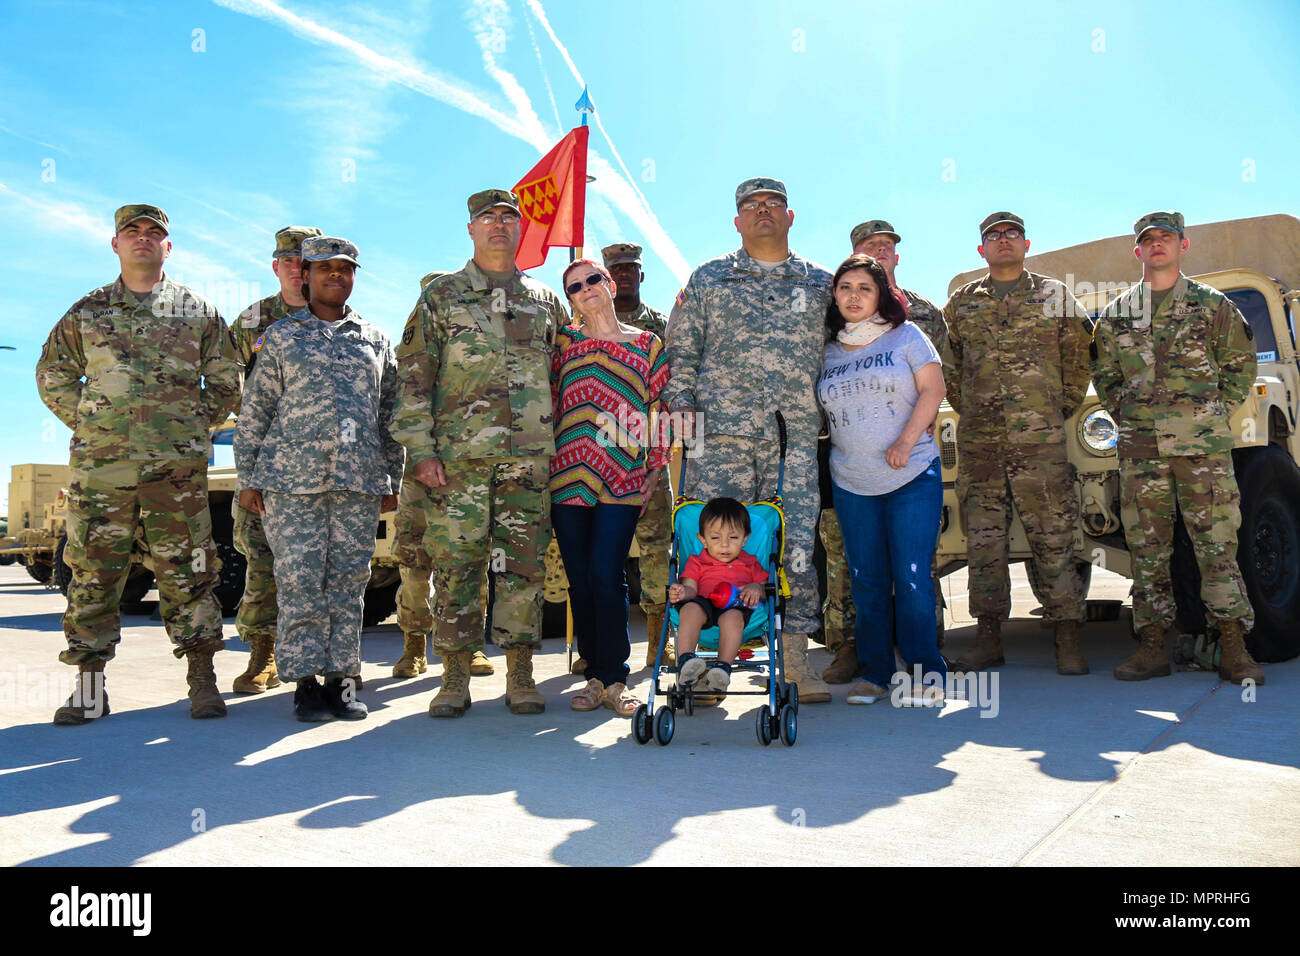 (Front and center, left to right) 1st Sgt. Victor Milam, Rustie Milam, Sgt. William Thomas Warren Jr., Nancy Nicole Adame-Warren, and William Ezra Warren, and Soldiers of Headquarters and Headquarters Battery, 32nd Army Air and Missile Defense Command, Fort Bliss, Texas, share their story of how they came together as the Army family through an emergency, April 6, 2017. The goal is to stay ready by assisting families inside and outside the unit’s element. (U.S. Army photo by Sgt. Aura E. Conejos, 32d AAMDC Public Affairs) Stock Photo